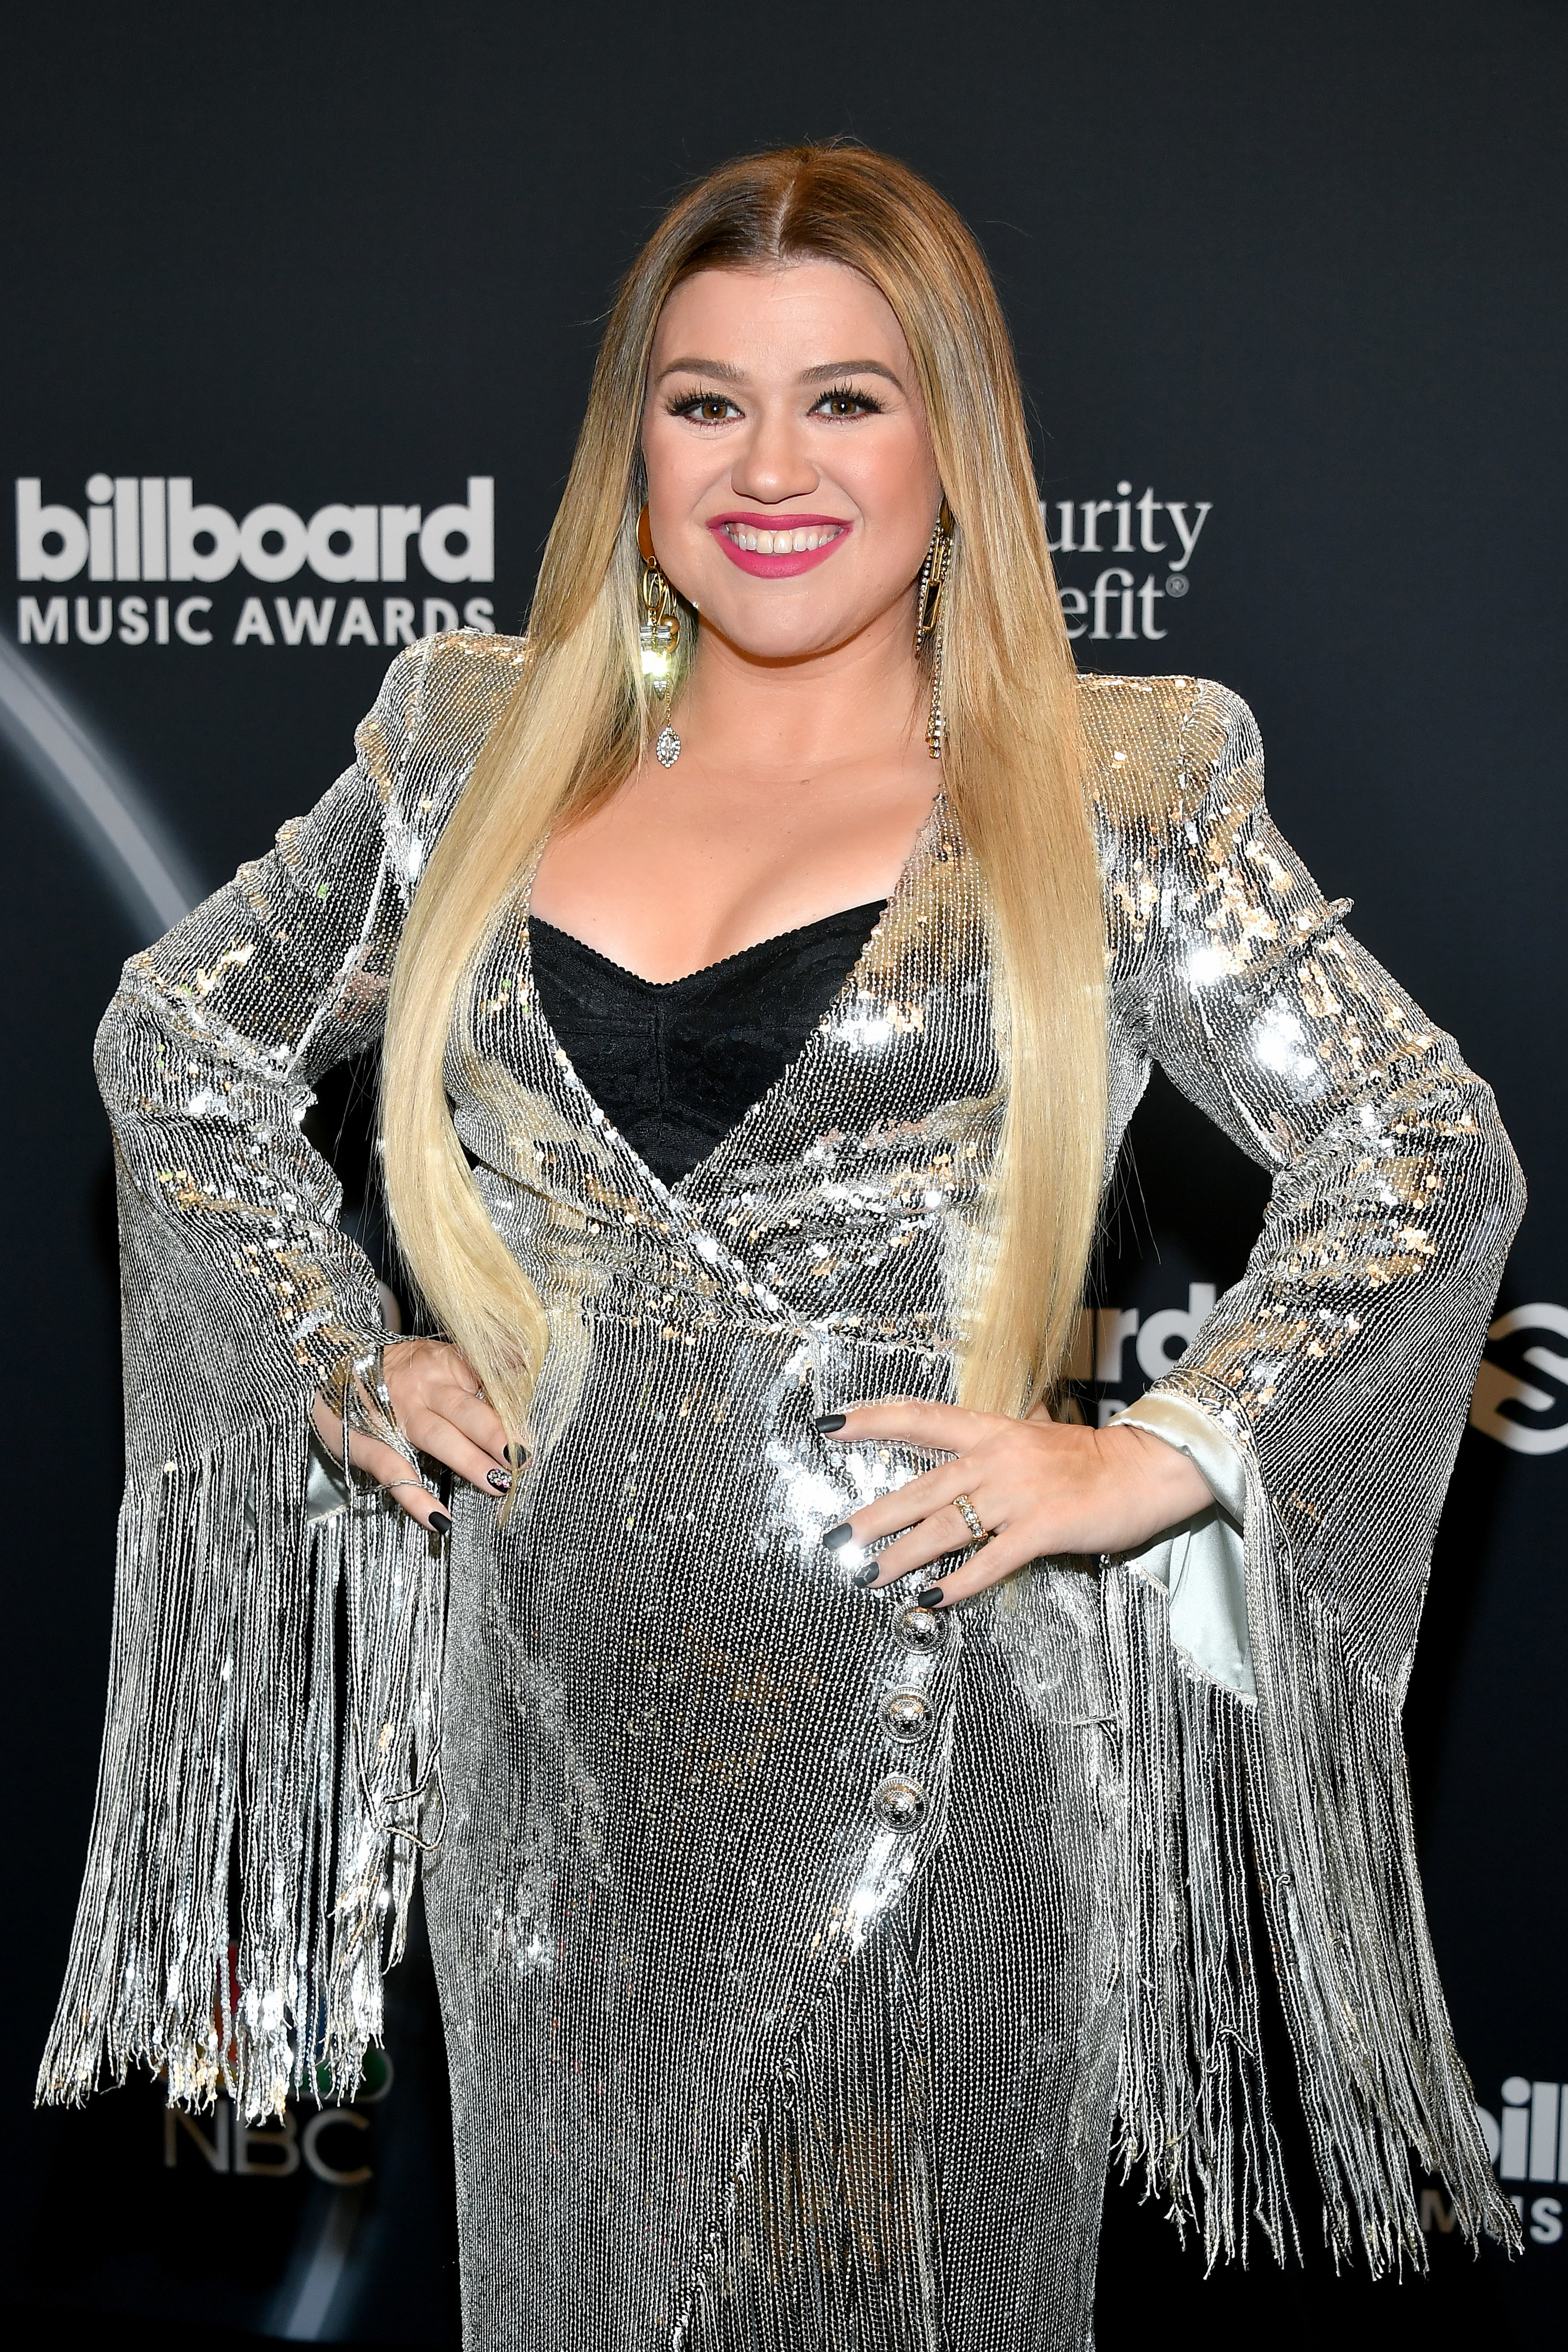 Kelly Clarkson is photographed at the 2020 Billboard Music Awards in October 2020